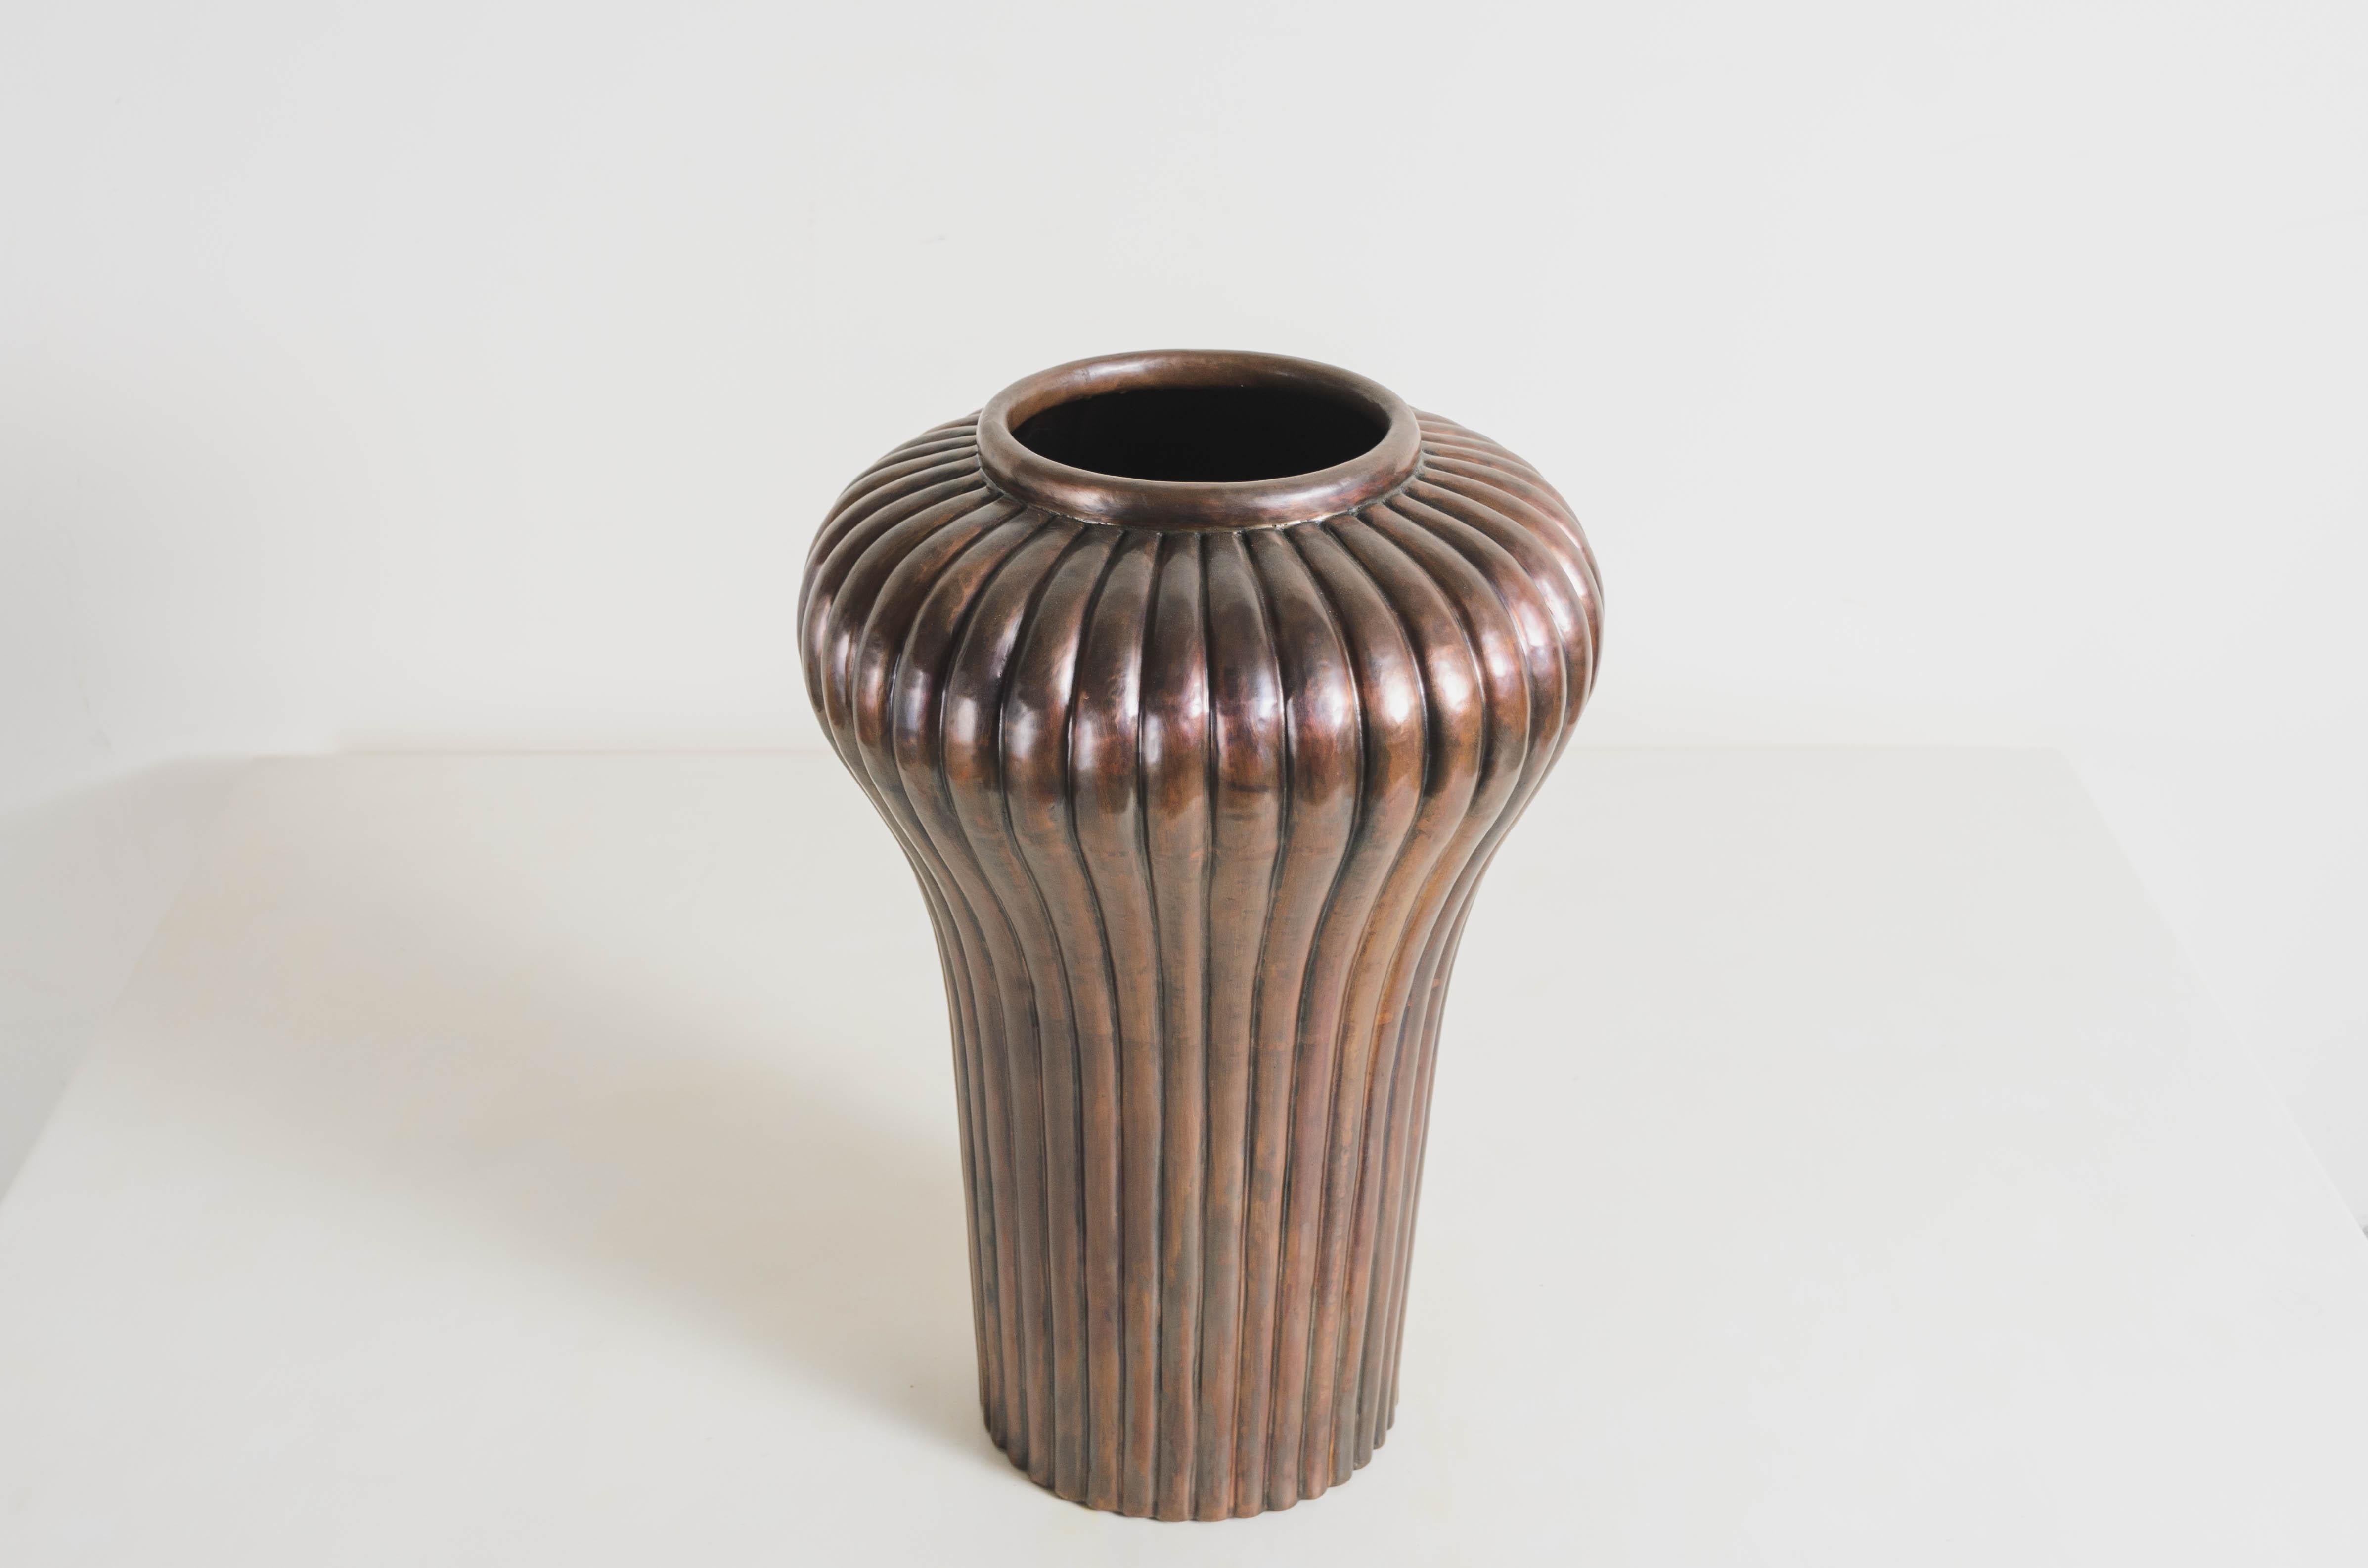 Ribbed Jar
Antique Copper
Hand Repoussé
Limited Edition
Each piece is individually crafted and is unique. 

Repoussé is the traditional art of hand-hammering decorative relief onto sheet metal. The technique originated around 800 BC between